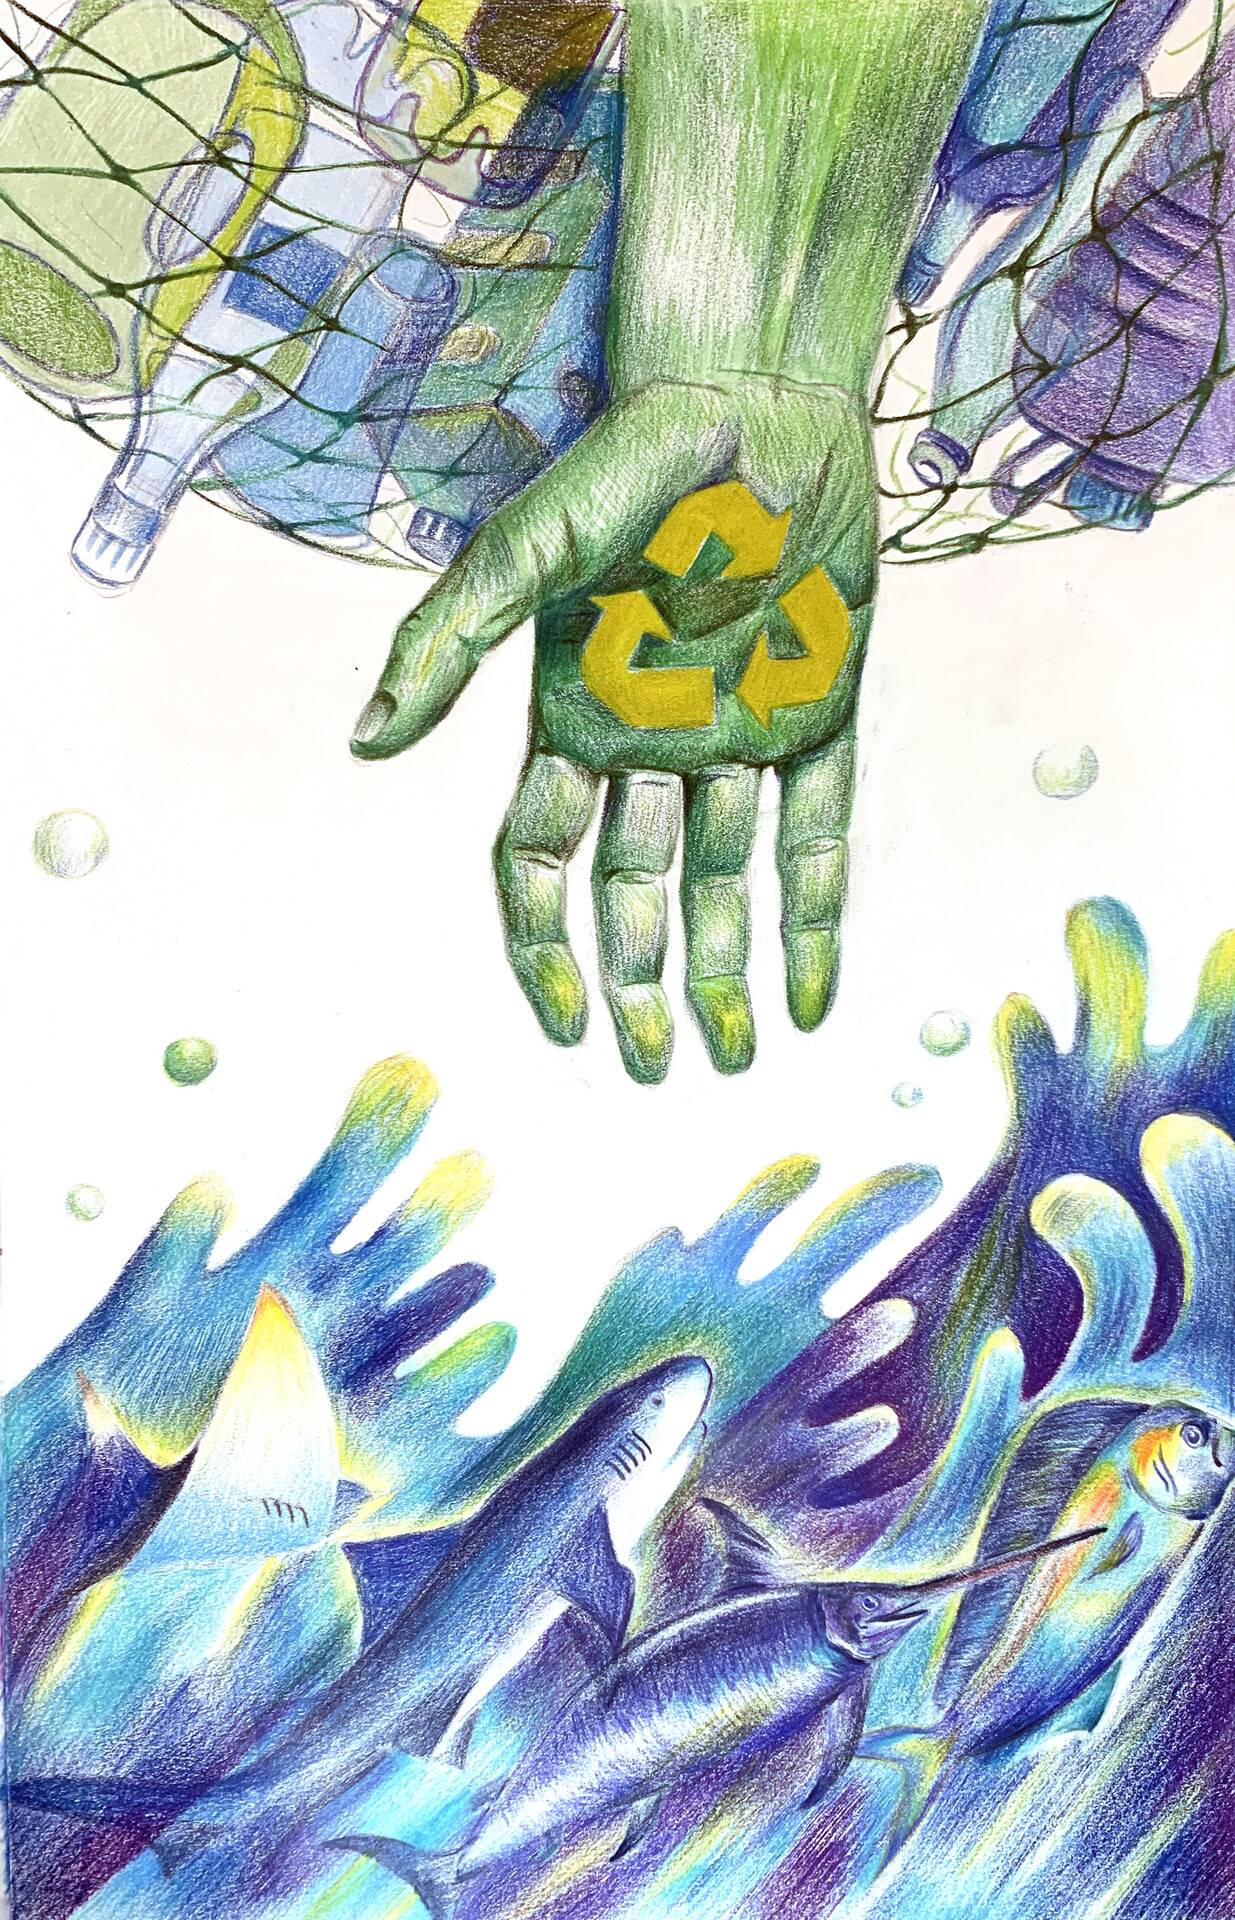 A hand reaches down through a net toward the ocean. The net is full of bottles and cans. The hand has a recycling symbol on its palm. The water reaches up, grasping, and fish can be seen in the waves.